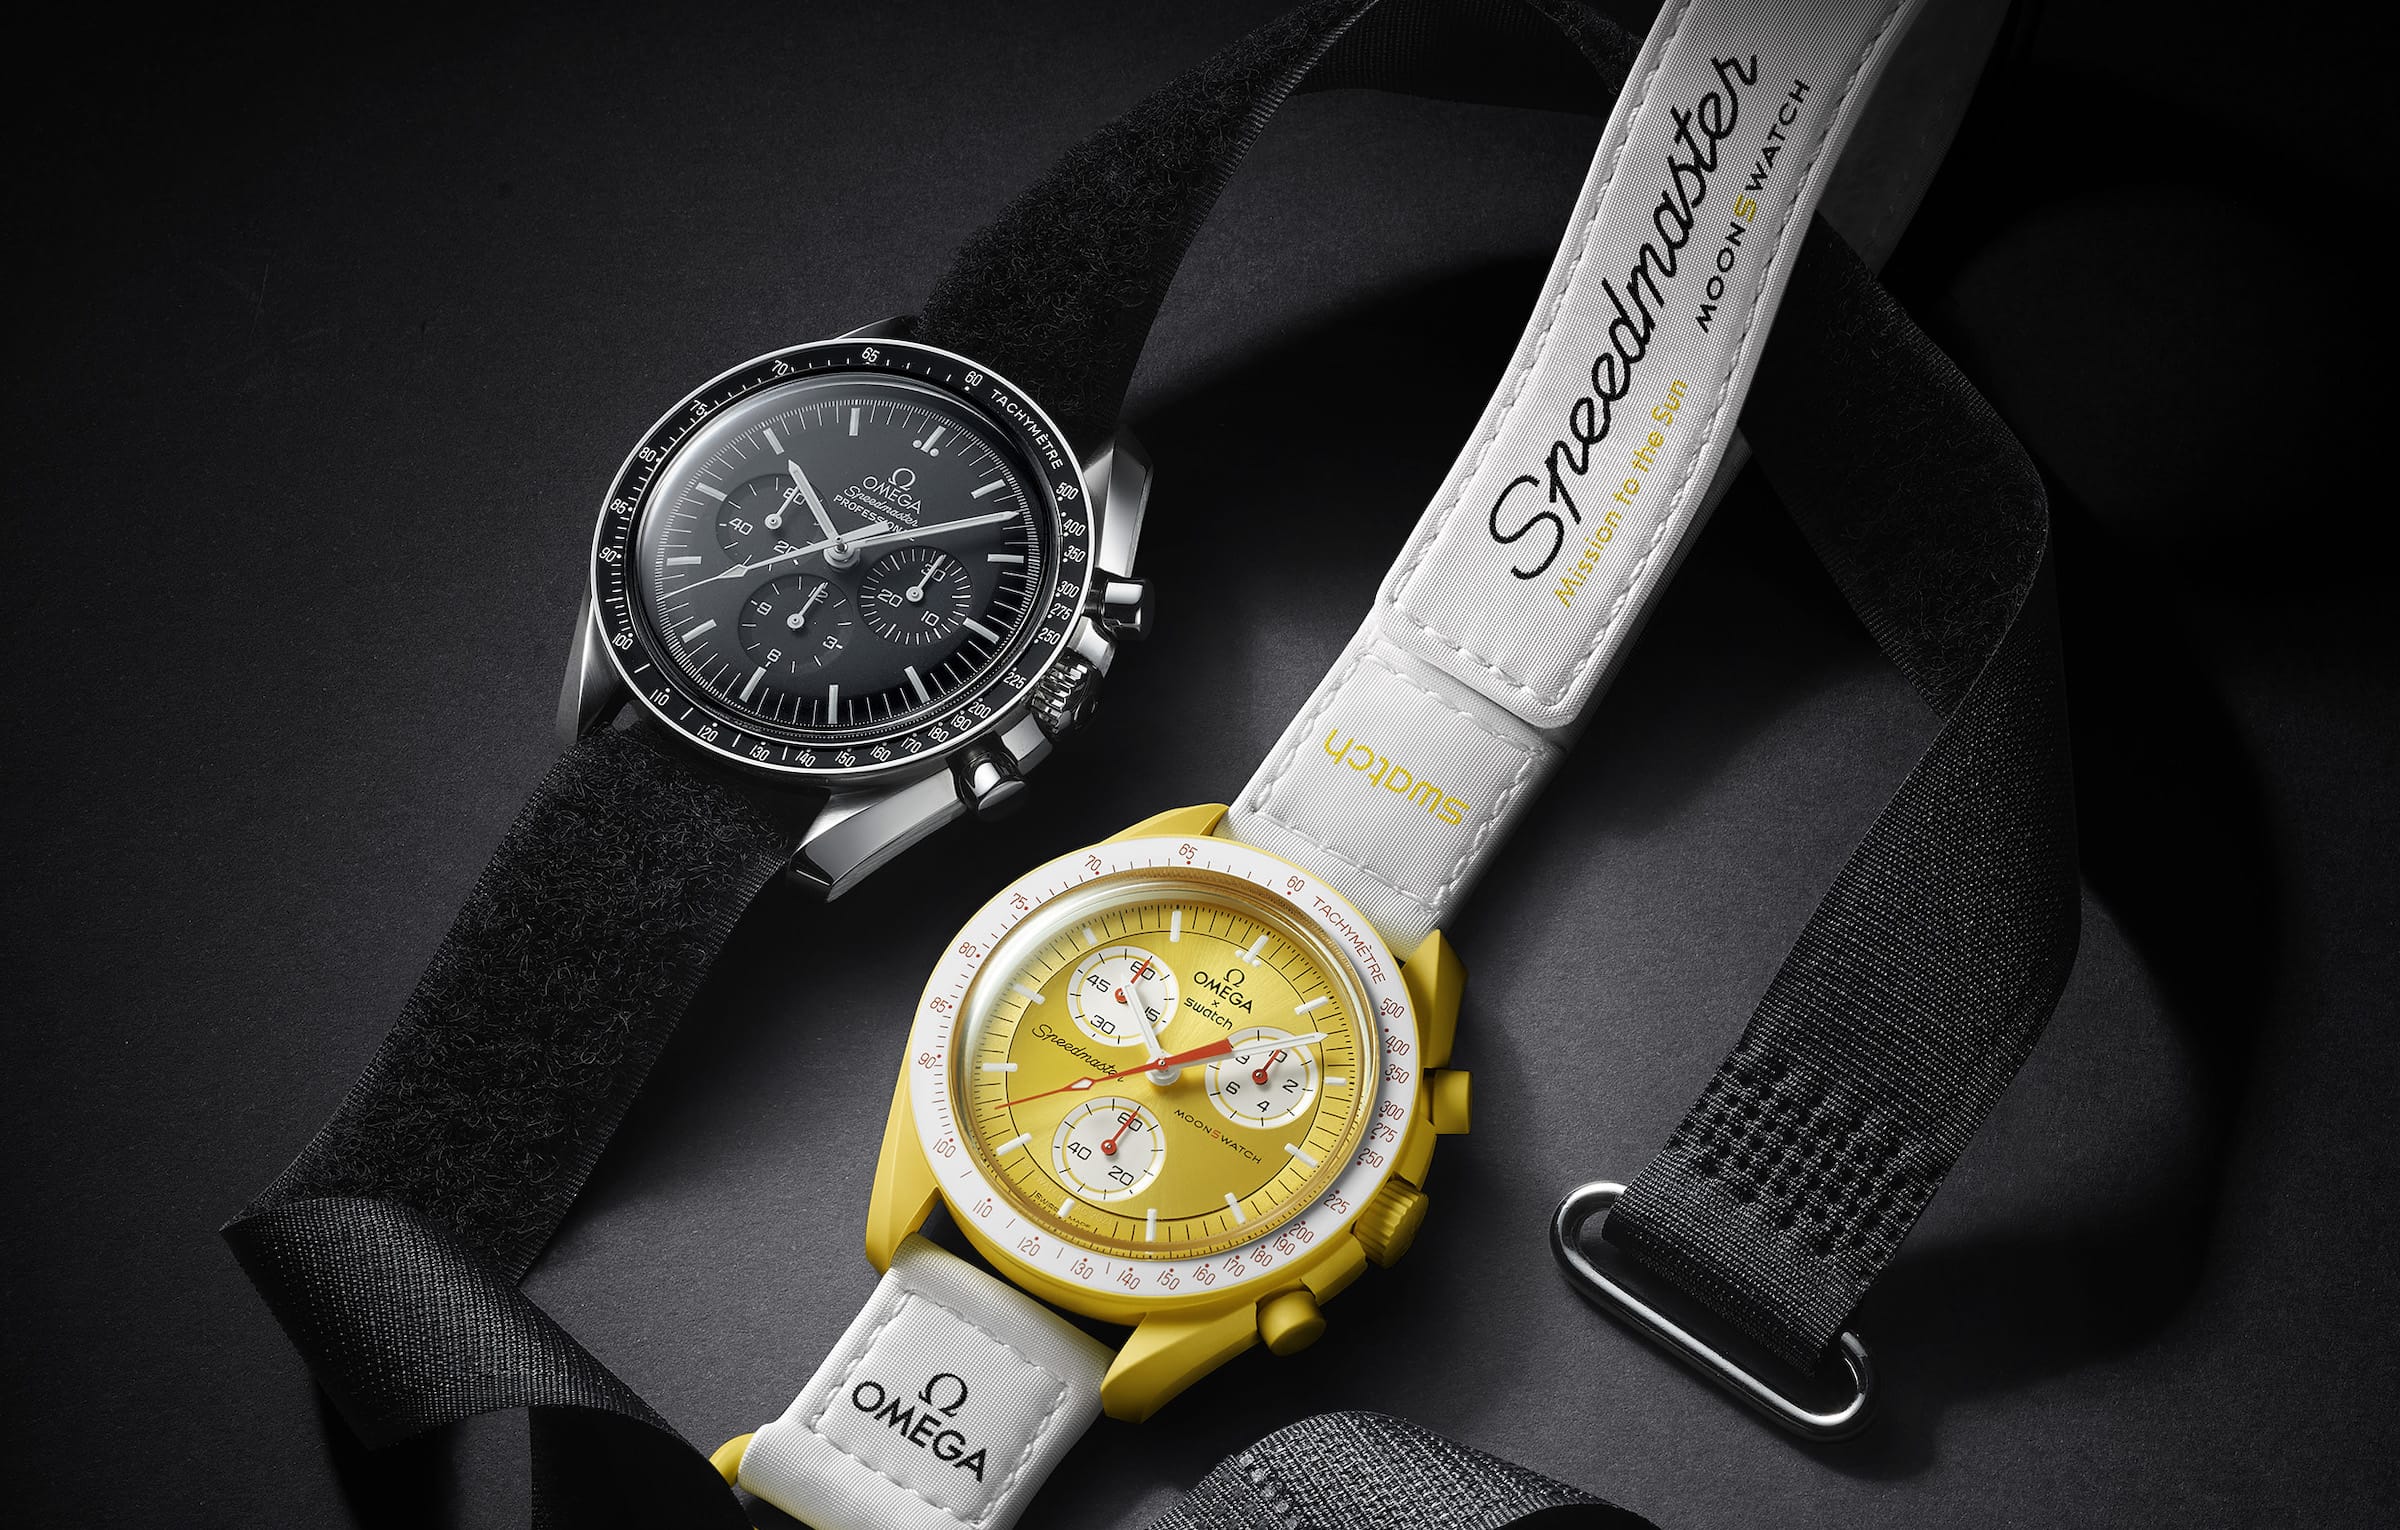 Joint mission: omega announce the launch of the bioceramic moonswatch